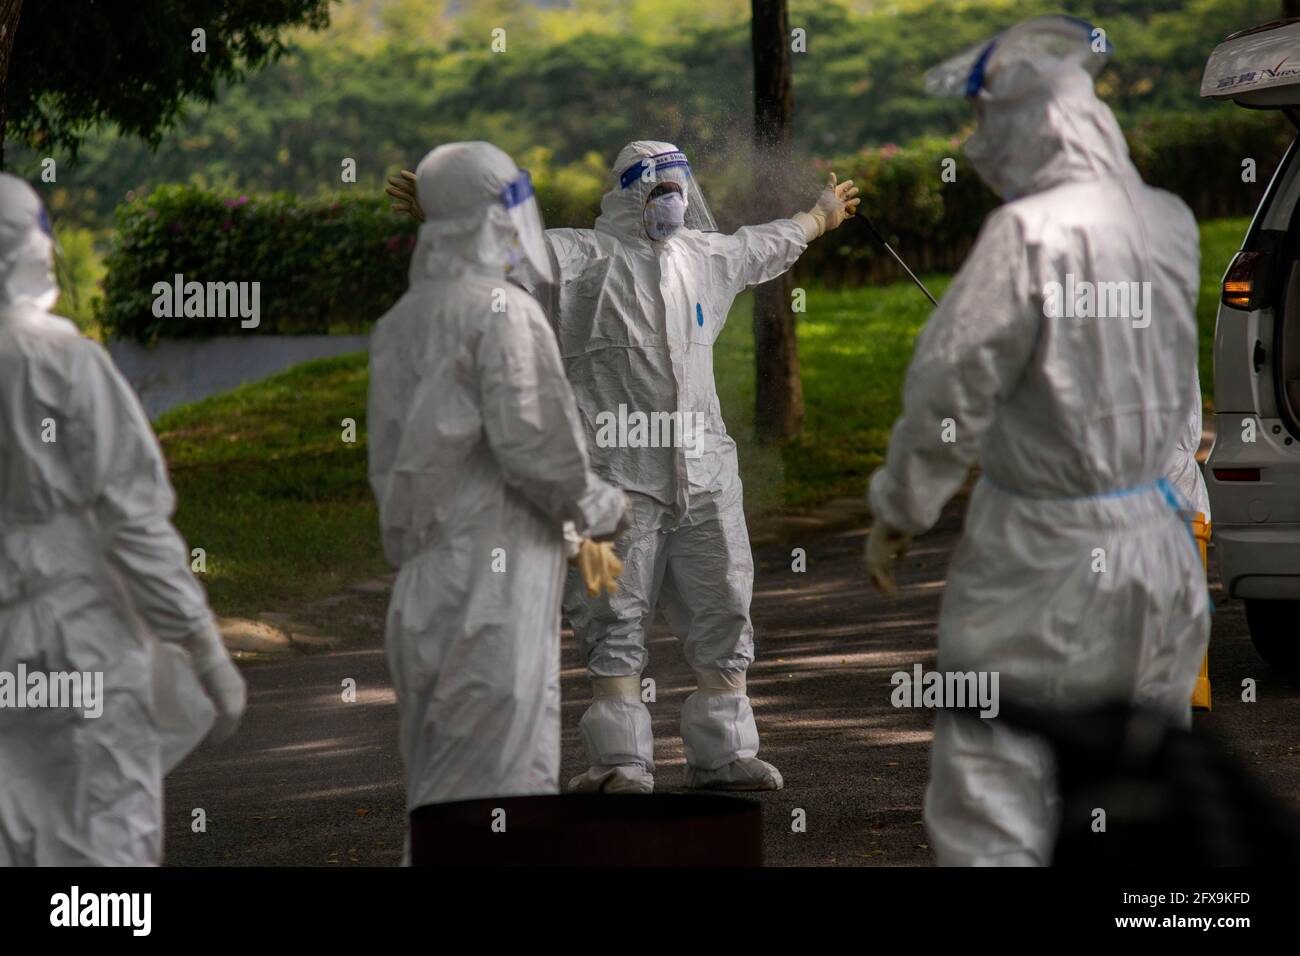 Semenyih, Malaysia. 26th May, 2021. People in protective suits disinfect themselves after burying a COVID-19 victim at a graveyard in Semenyih, Selangor, Malaysia, May 26, 2021. Malaysia on Wednesday reported the highest daily spike of new confirmed COVID-19 cases and deaths since the start of the pandemic, the Health Ministry said. As many as 7,478 new COVID-19 infections were reported, bringing the national total to 533,367. Another 63 deaths have been reported, the highest in a single day, pushing the total deaths to 2,432. Credit: Chong Voon Chung/Xinhua/Alamy Live News Stock Photo